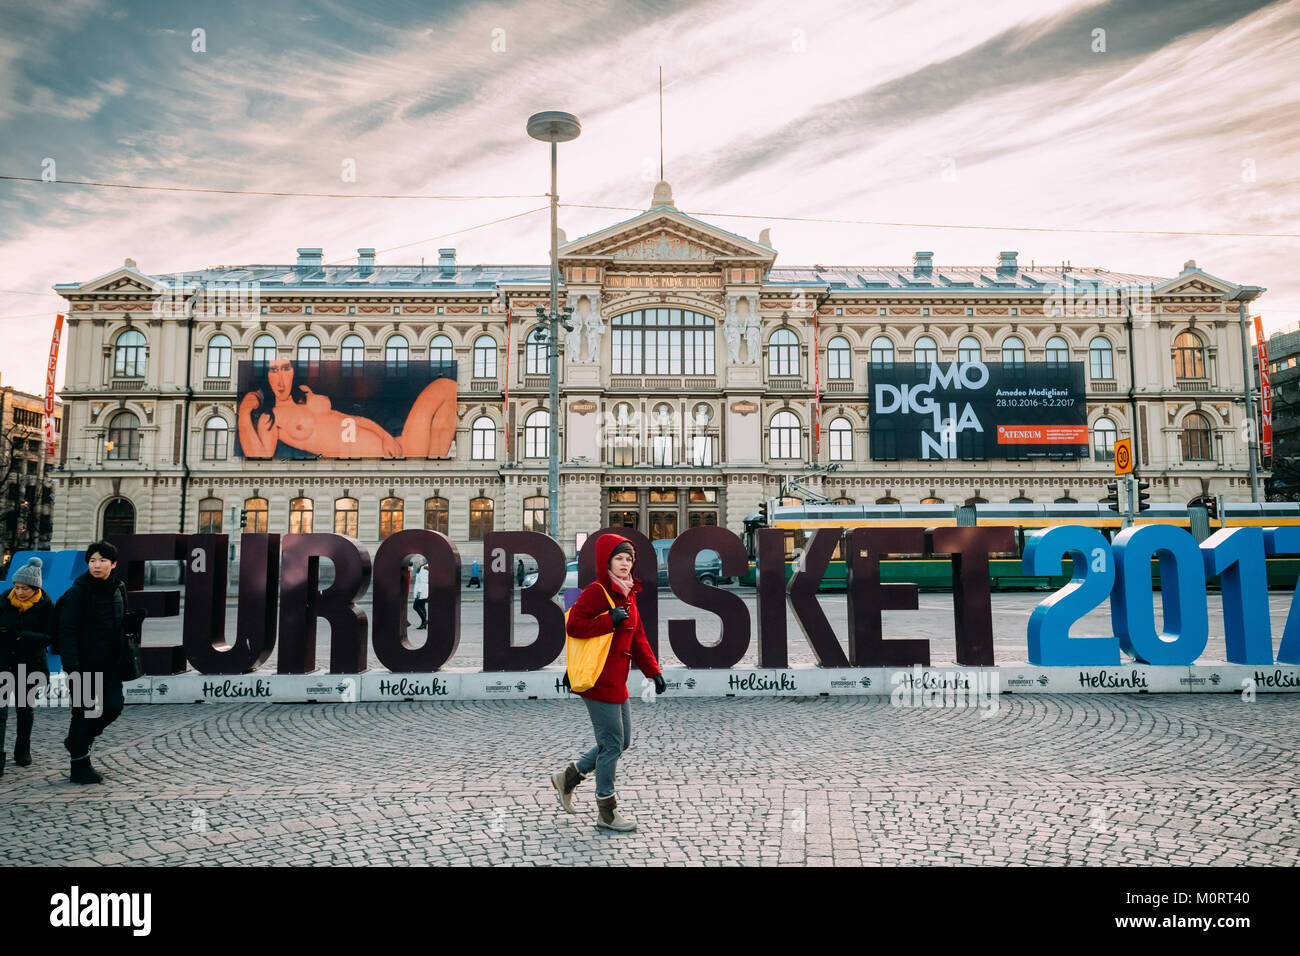 Helsinki, Finland - December 10, 2016: Sign For Eurobasket 2017 On Background Of Art Museum Ateneum. Finnish Capital Hosts The 40th Edition Of Europea Stock Photo